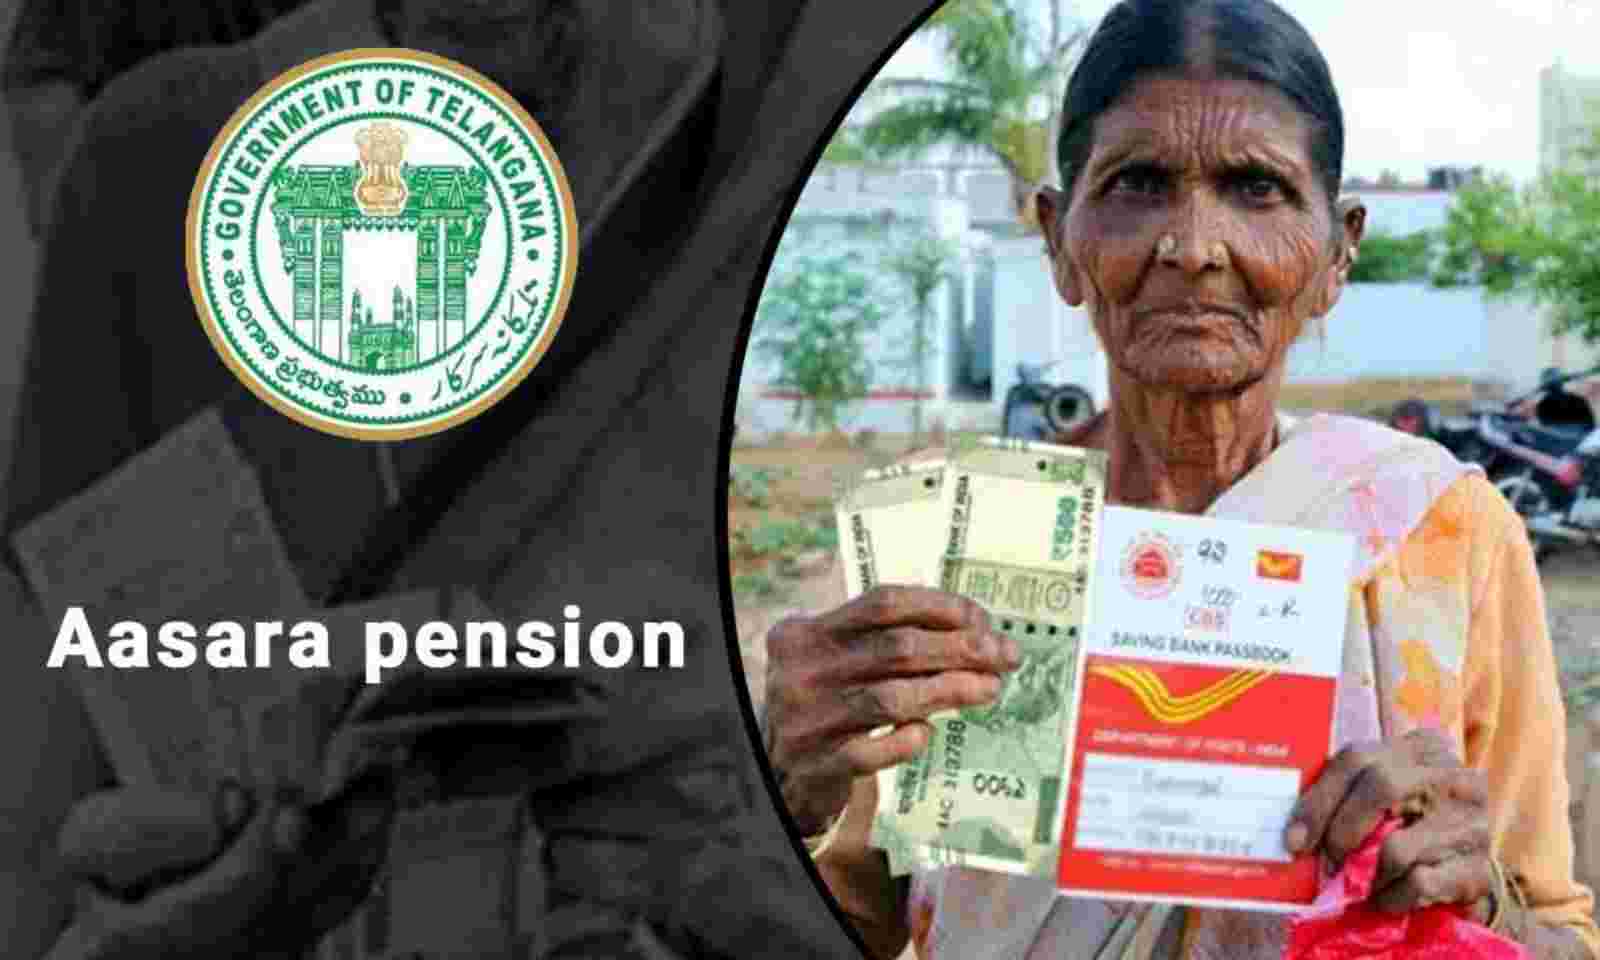 Now collect Aasara pension cards from MRO offices